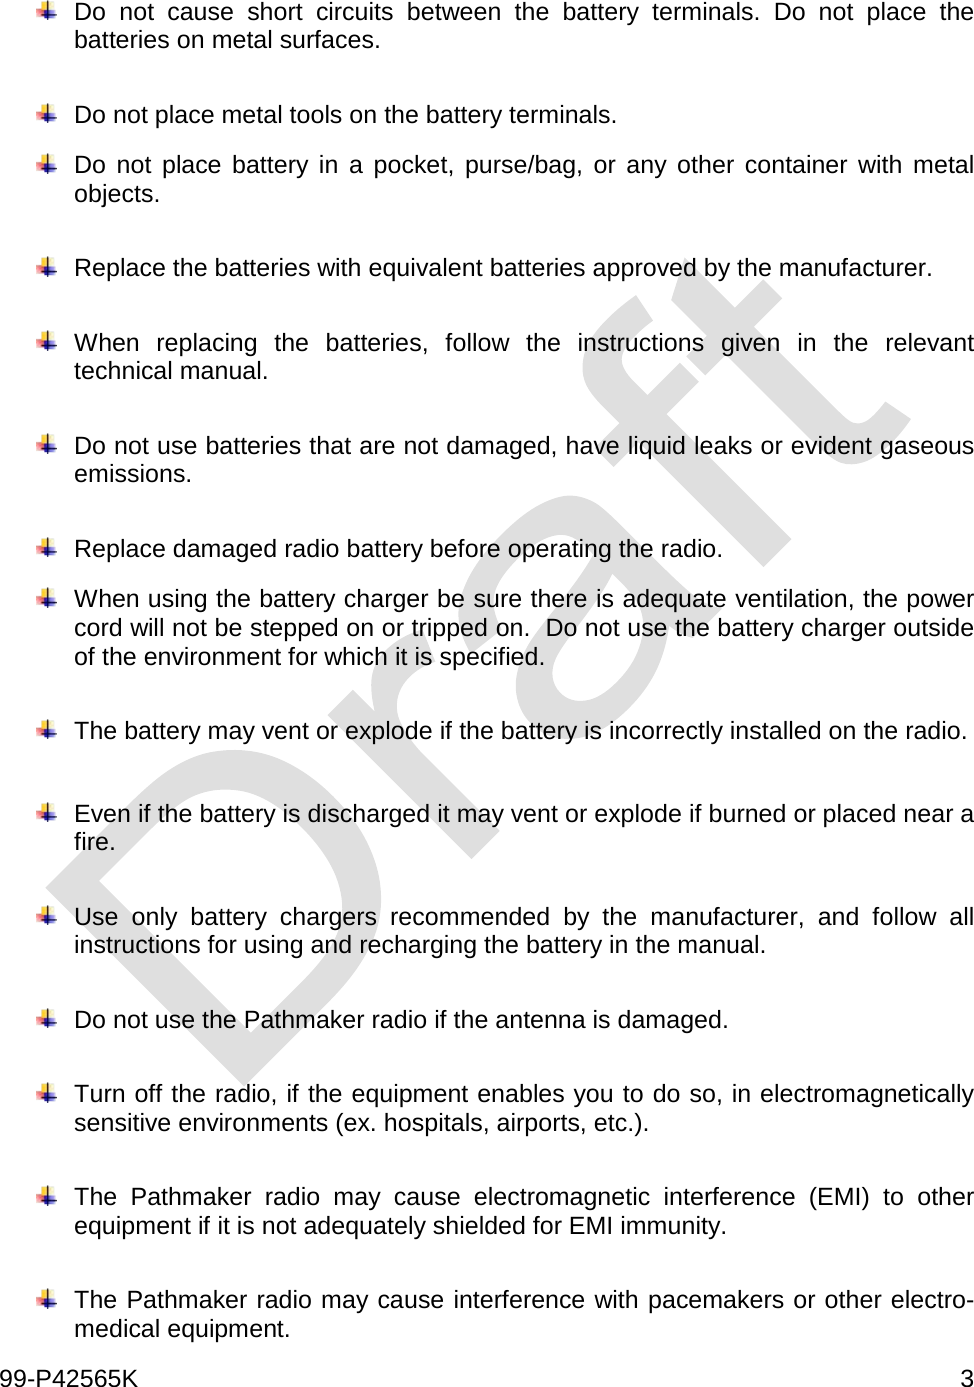  99-P42565K     3   Do not cause short circuits between the battery terminals. Do not place the batteries on metal surfaces.   Do not place metal tools on the battery terminals.   Do not place battery in a pocket, purse/bag, or any other container with metal objects.   Replace the batteries with equivalent batteries approved by the manufacturer.   When replacing the batteries, follow the instructions given in the relevant technical manual.   Do not use batteries that are not damaged, have liquid leaks or evident gaseous emissions.   Replace damaged radio battery before operating the radio.     When using the battery charger be sure there is adequate ventilation, the power cord will not be stepped on or tripped on.  Do not use the battery charger outside of the environment for which it is specified.   The battery may vent or explode if the battery is incorrectly installed on the radio.     Even if the battery is discharged it may vent or explode if burned or placed near a fire.     Use only battery chargers recommended by the manufacturer, and follow all instructions for using and recharging the battery in the manual.     Do not use the Pathmaker radio if the antenna is damaged.   Turn off the radio, if the equipment enables you to do so, in electromagnetically sensitive environments (ex. hospitals, airports, etc.).   The Pathmaker radio may cause electromagnetic interference (EMI) to other equipment if it is not adequately shielded for EMI immunity.   The Pathmaker radio may cause interference with pacemakers or other electro-medical equipment.  